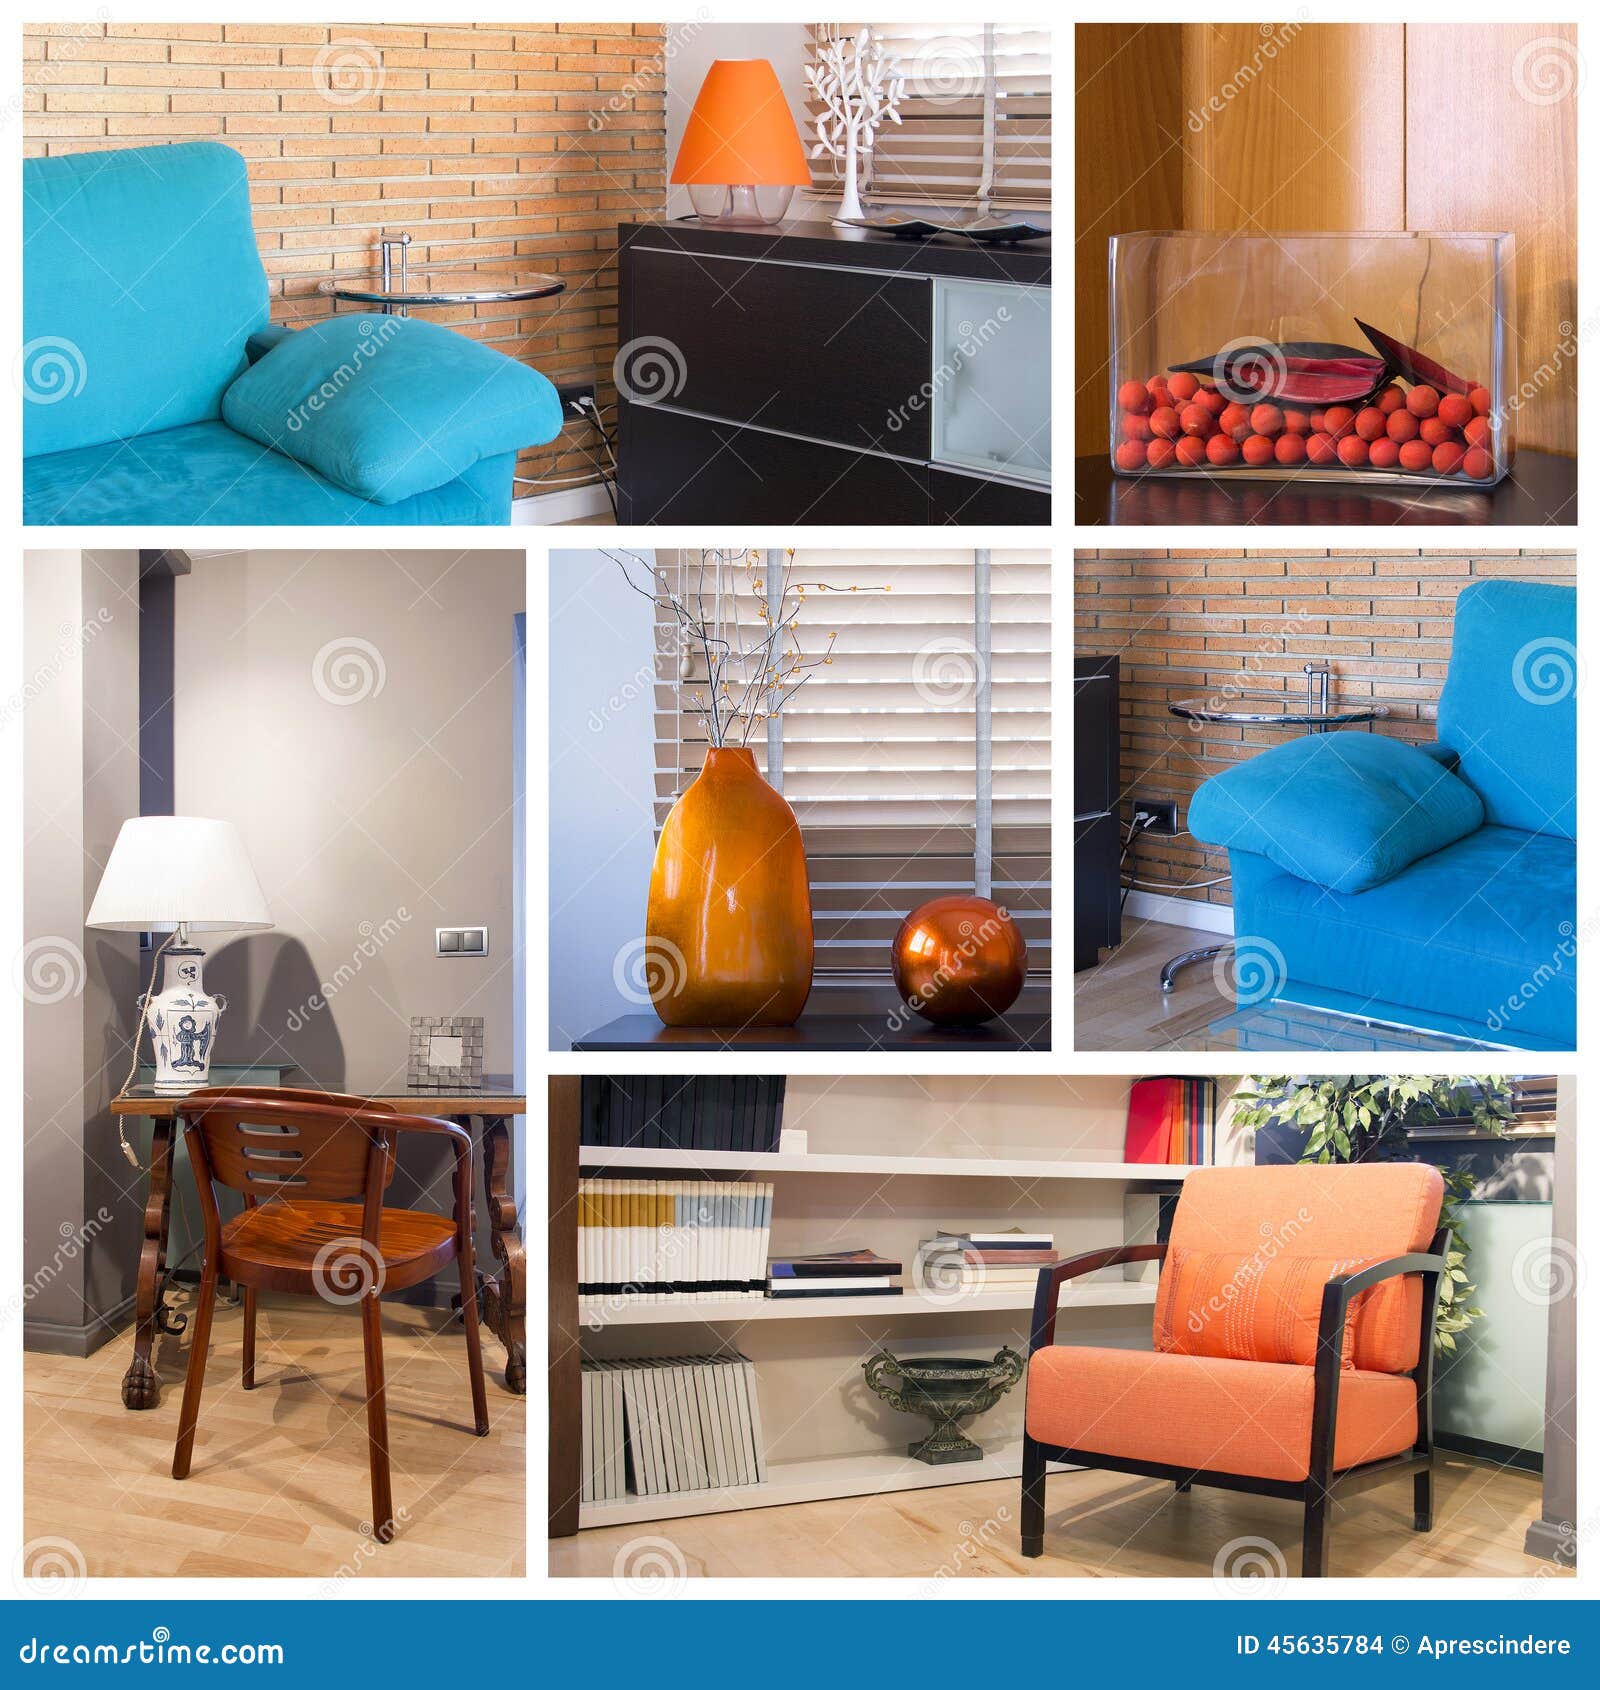 Living Room Collage Stock Photo - Image: 45635784